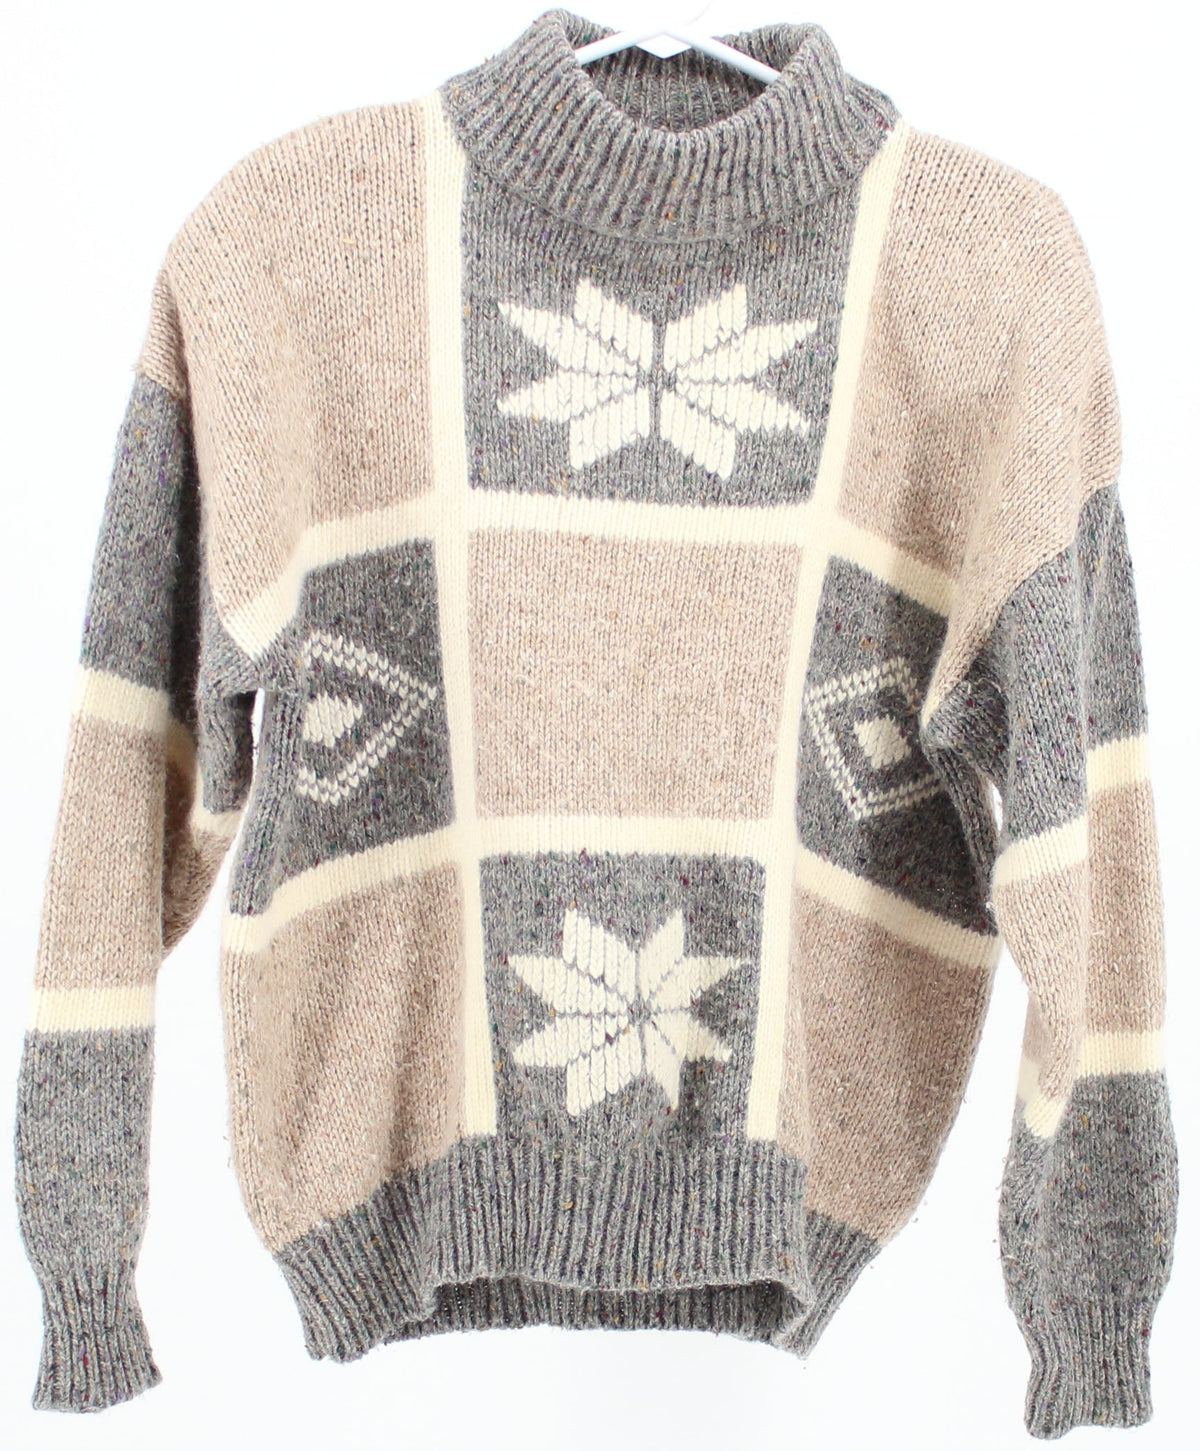 Albee Jacquard Grey Beige and Off White Sweater